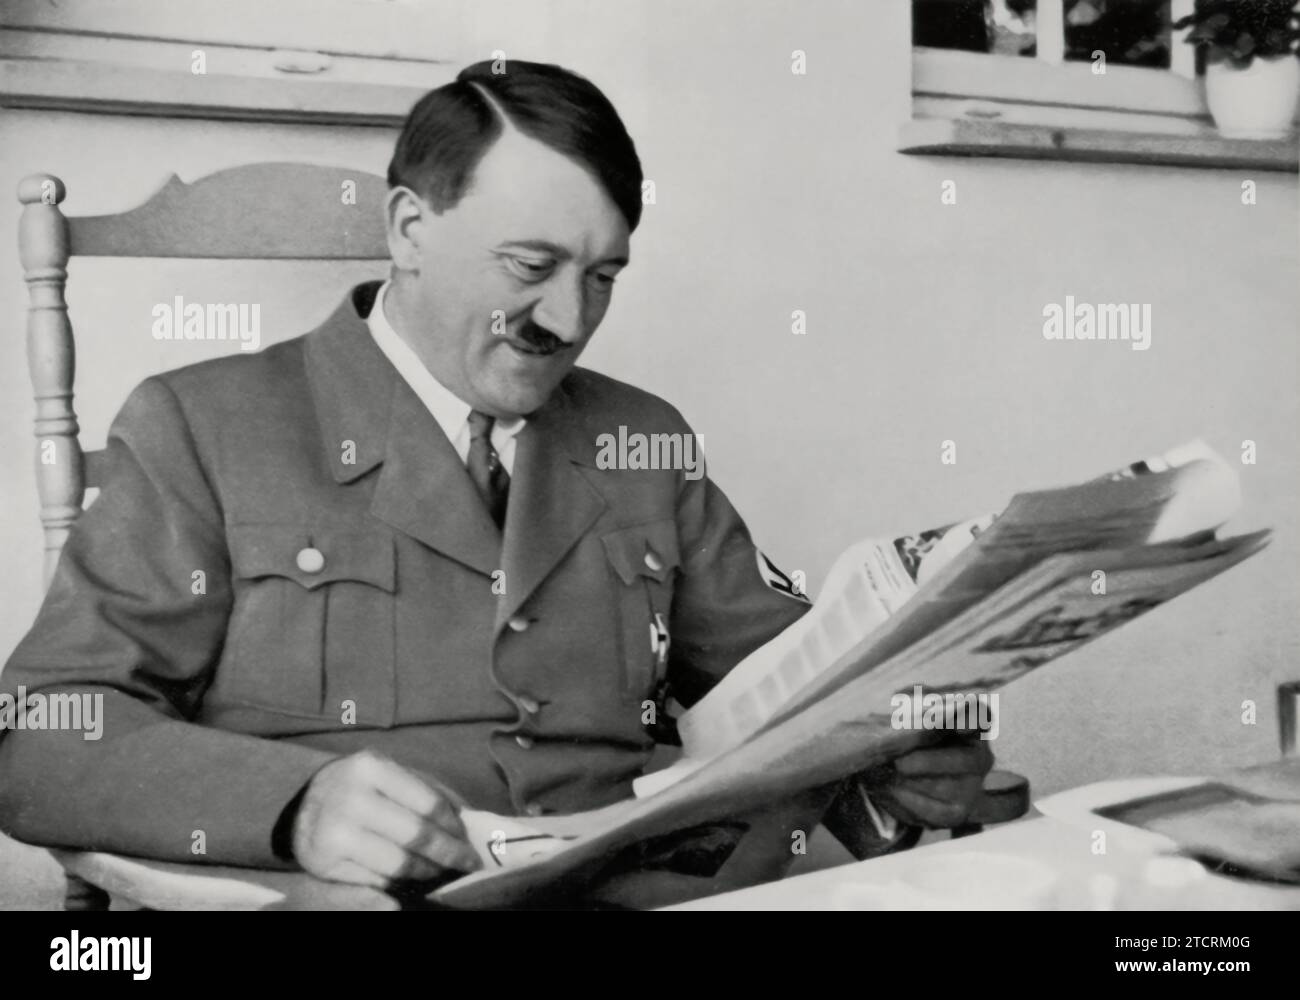 Adolf Hitler is depicted reading a paper, an image titled to suggest he is receiving 'good news.' This portrayal is likely meant to convey a moment of positive development or success, fitting into the broader narrative of his leadership. The act of reading a paper and the implied positive content are used to project an image of a well-informed and triumphant leader. Stock Photo